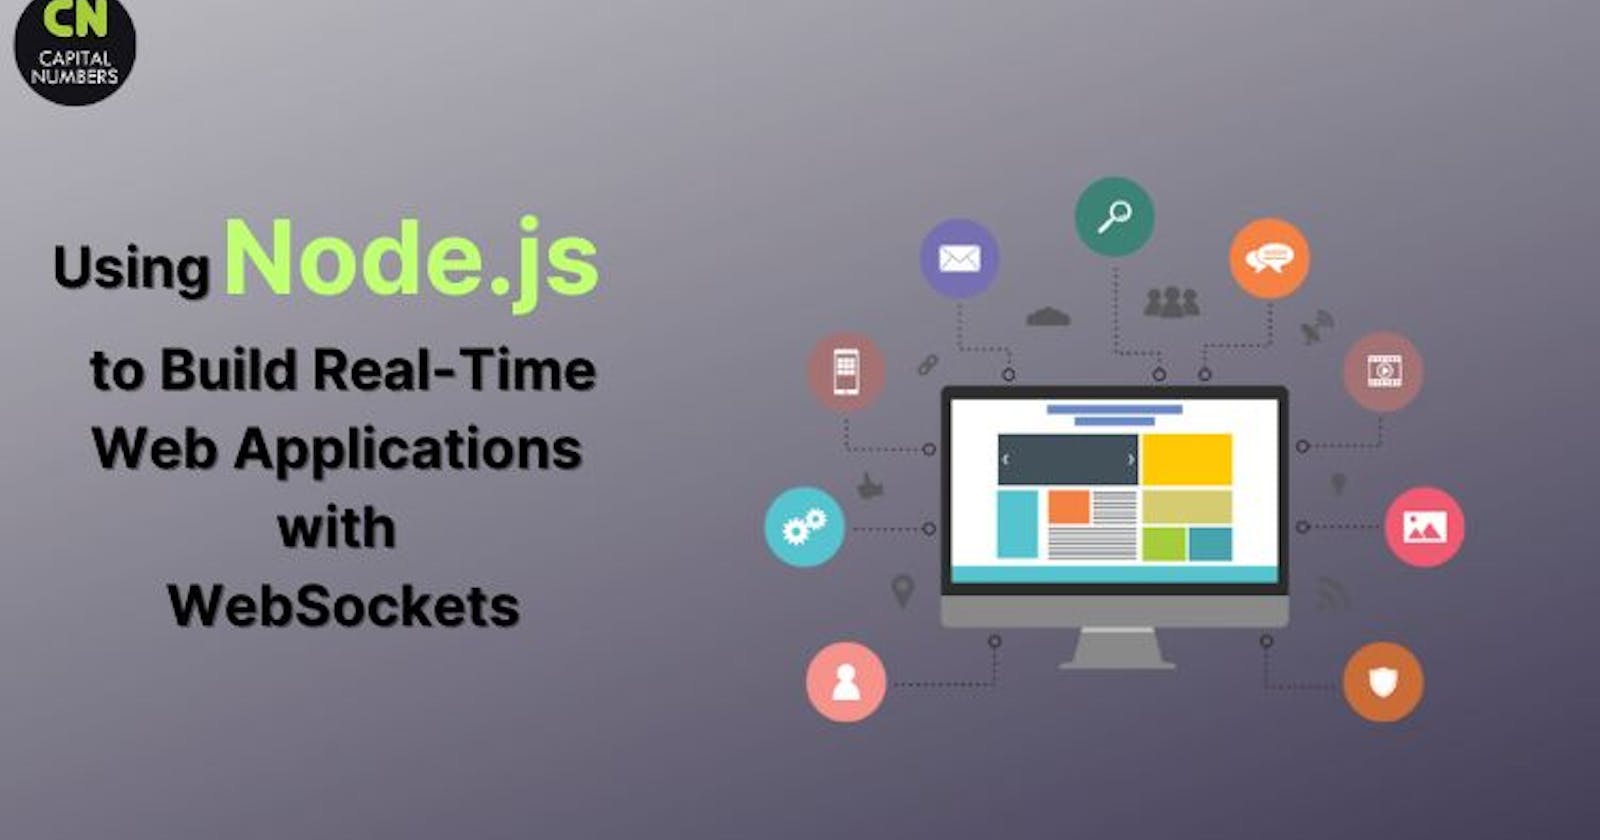 Using Node.js to Build Real-Time Web Applications with WebSockets